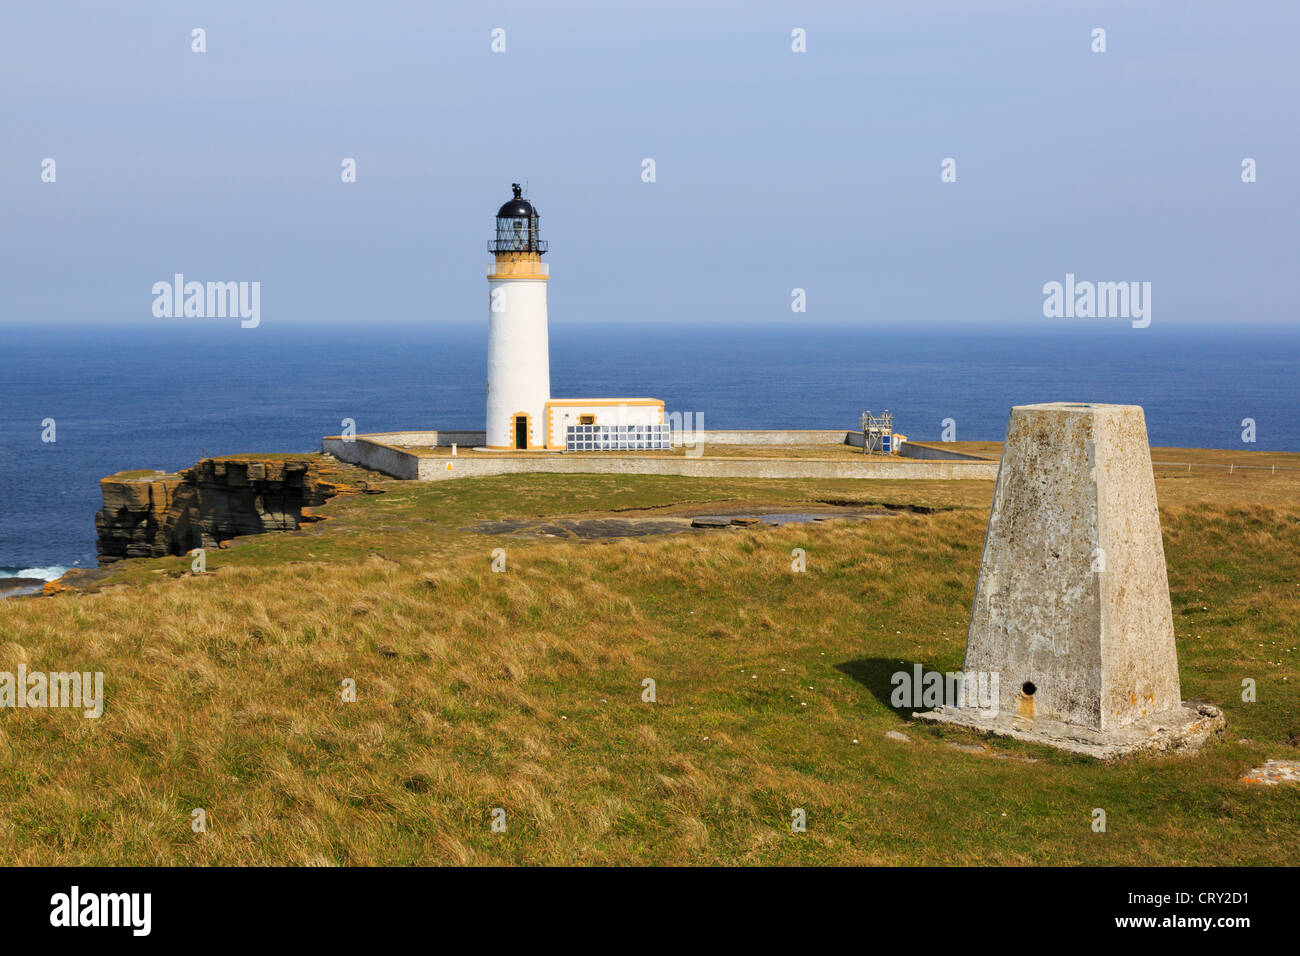 Trig point and lighthouse built on headland to warn ships off North Shoal at Noup Head, Westray Island, Orkney Islands, Northern Isles, Scotland, UK Stock Photo